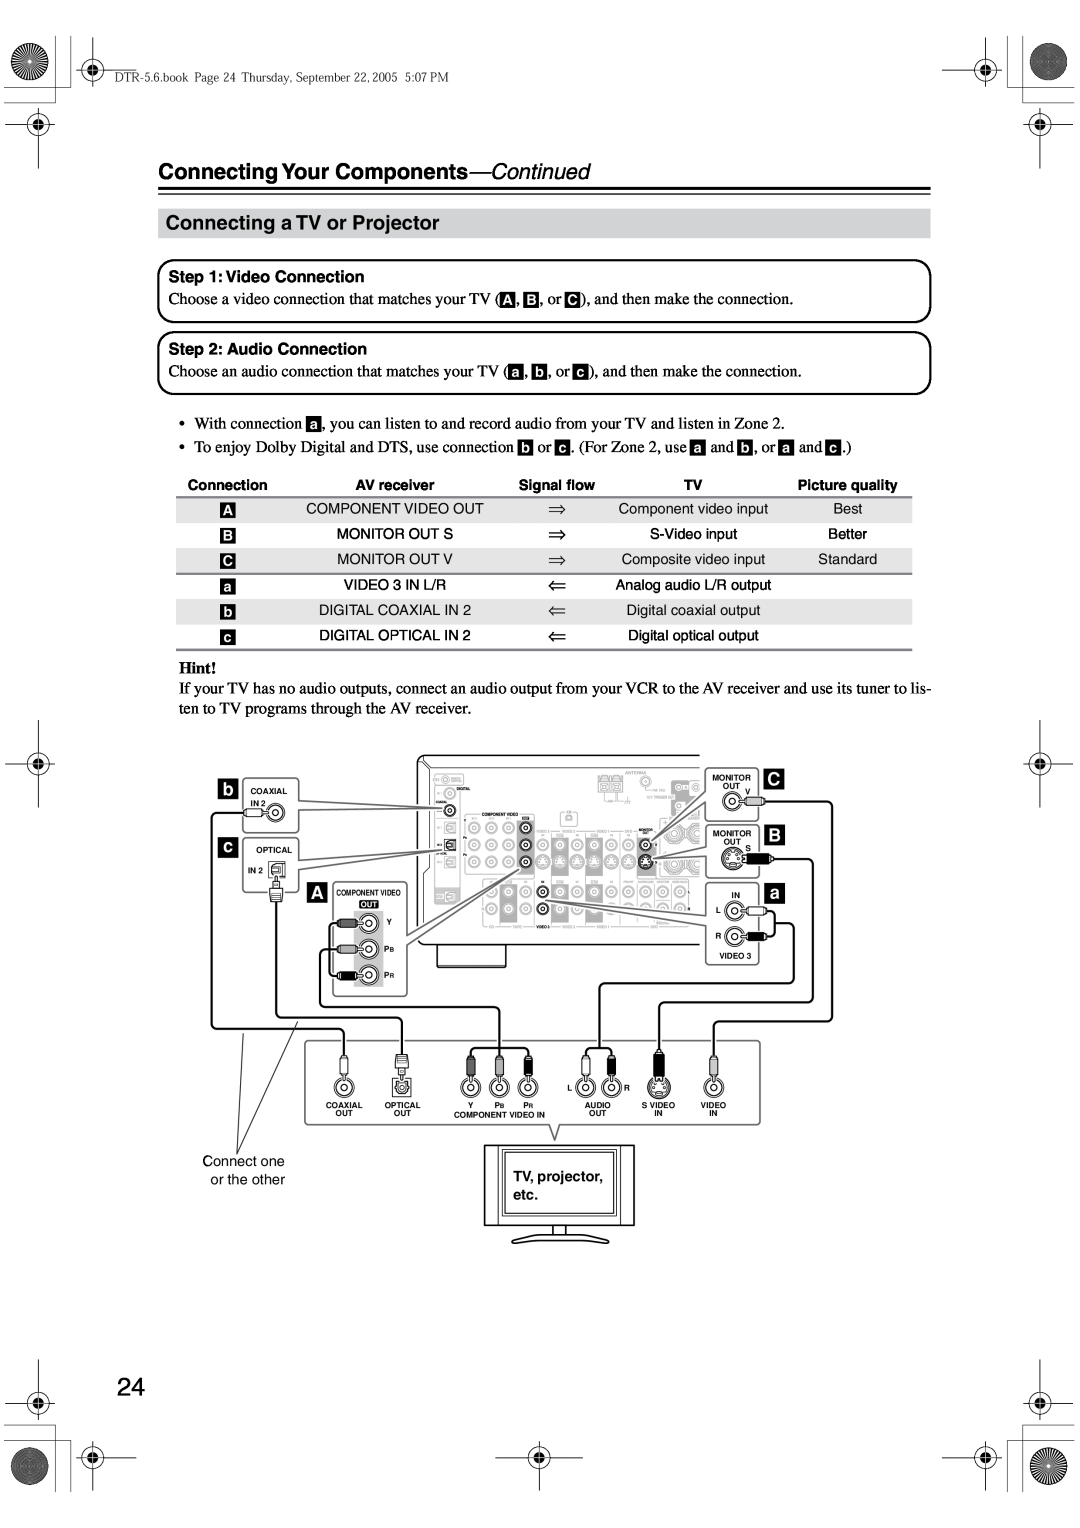 Integra DTR-5.6 instruction manual Connecting a TV or Projector, C B a, Hint, Connecting Your Components—Continued 